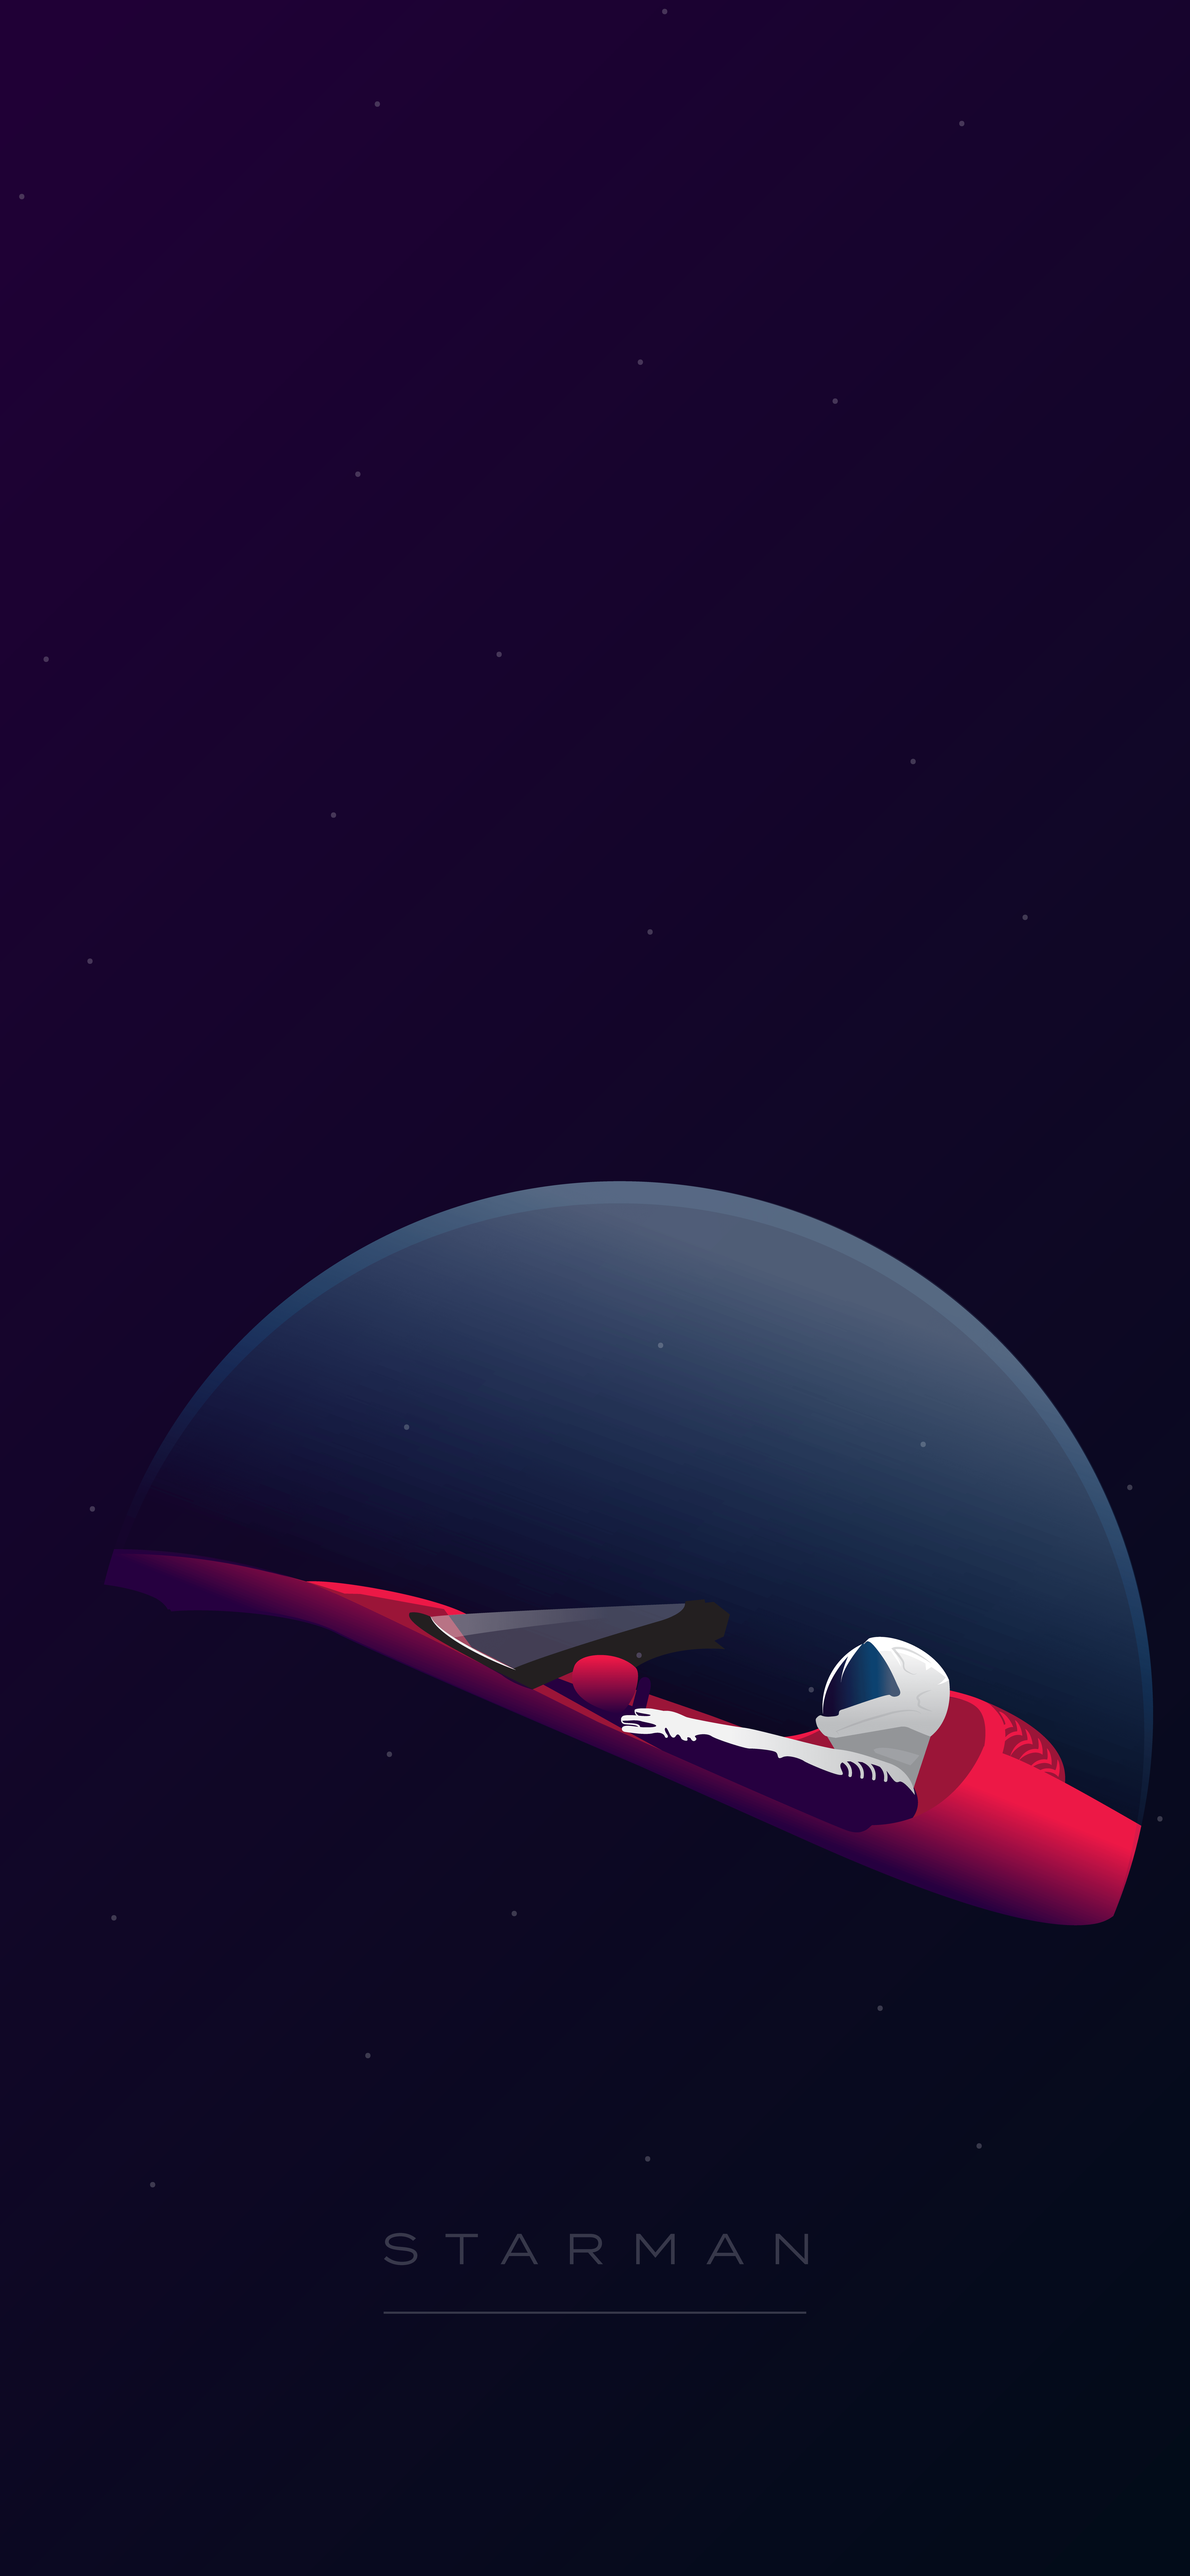 SpaceX Starman Wallpaper Inspired From Falcon Heavy's Tesla Launch. iPhone wallpaper HD original, Phone wallpaper, iPhone wallpaper fall